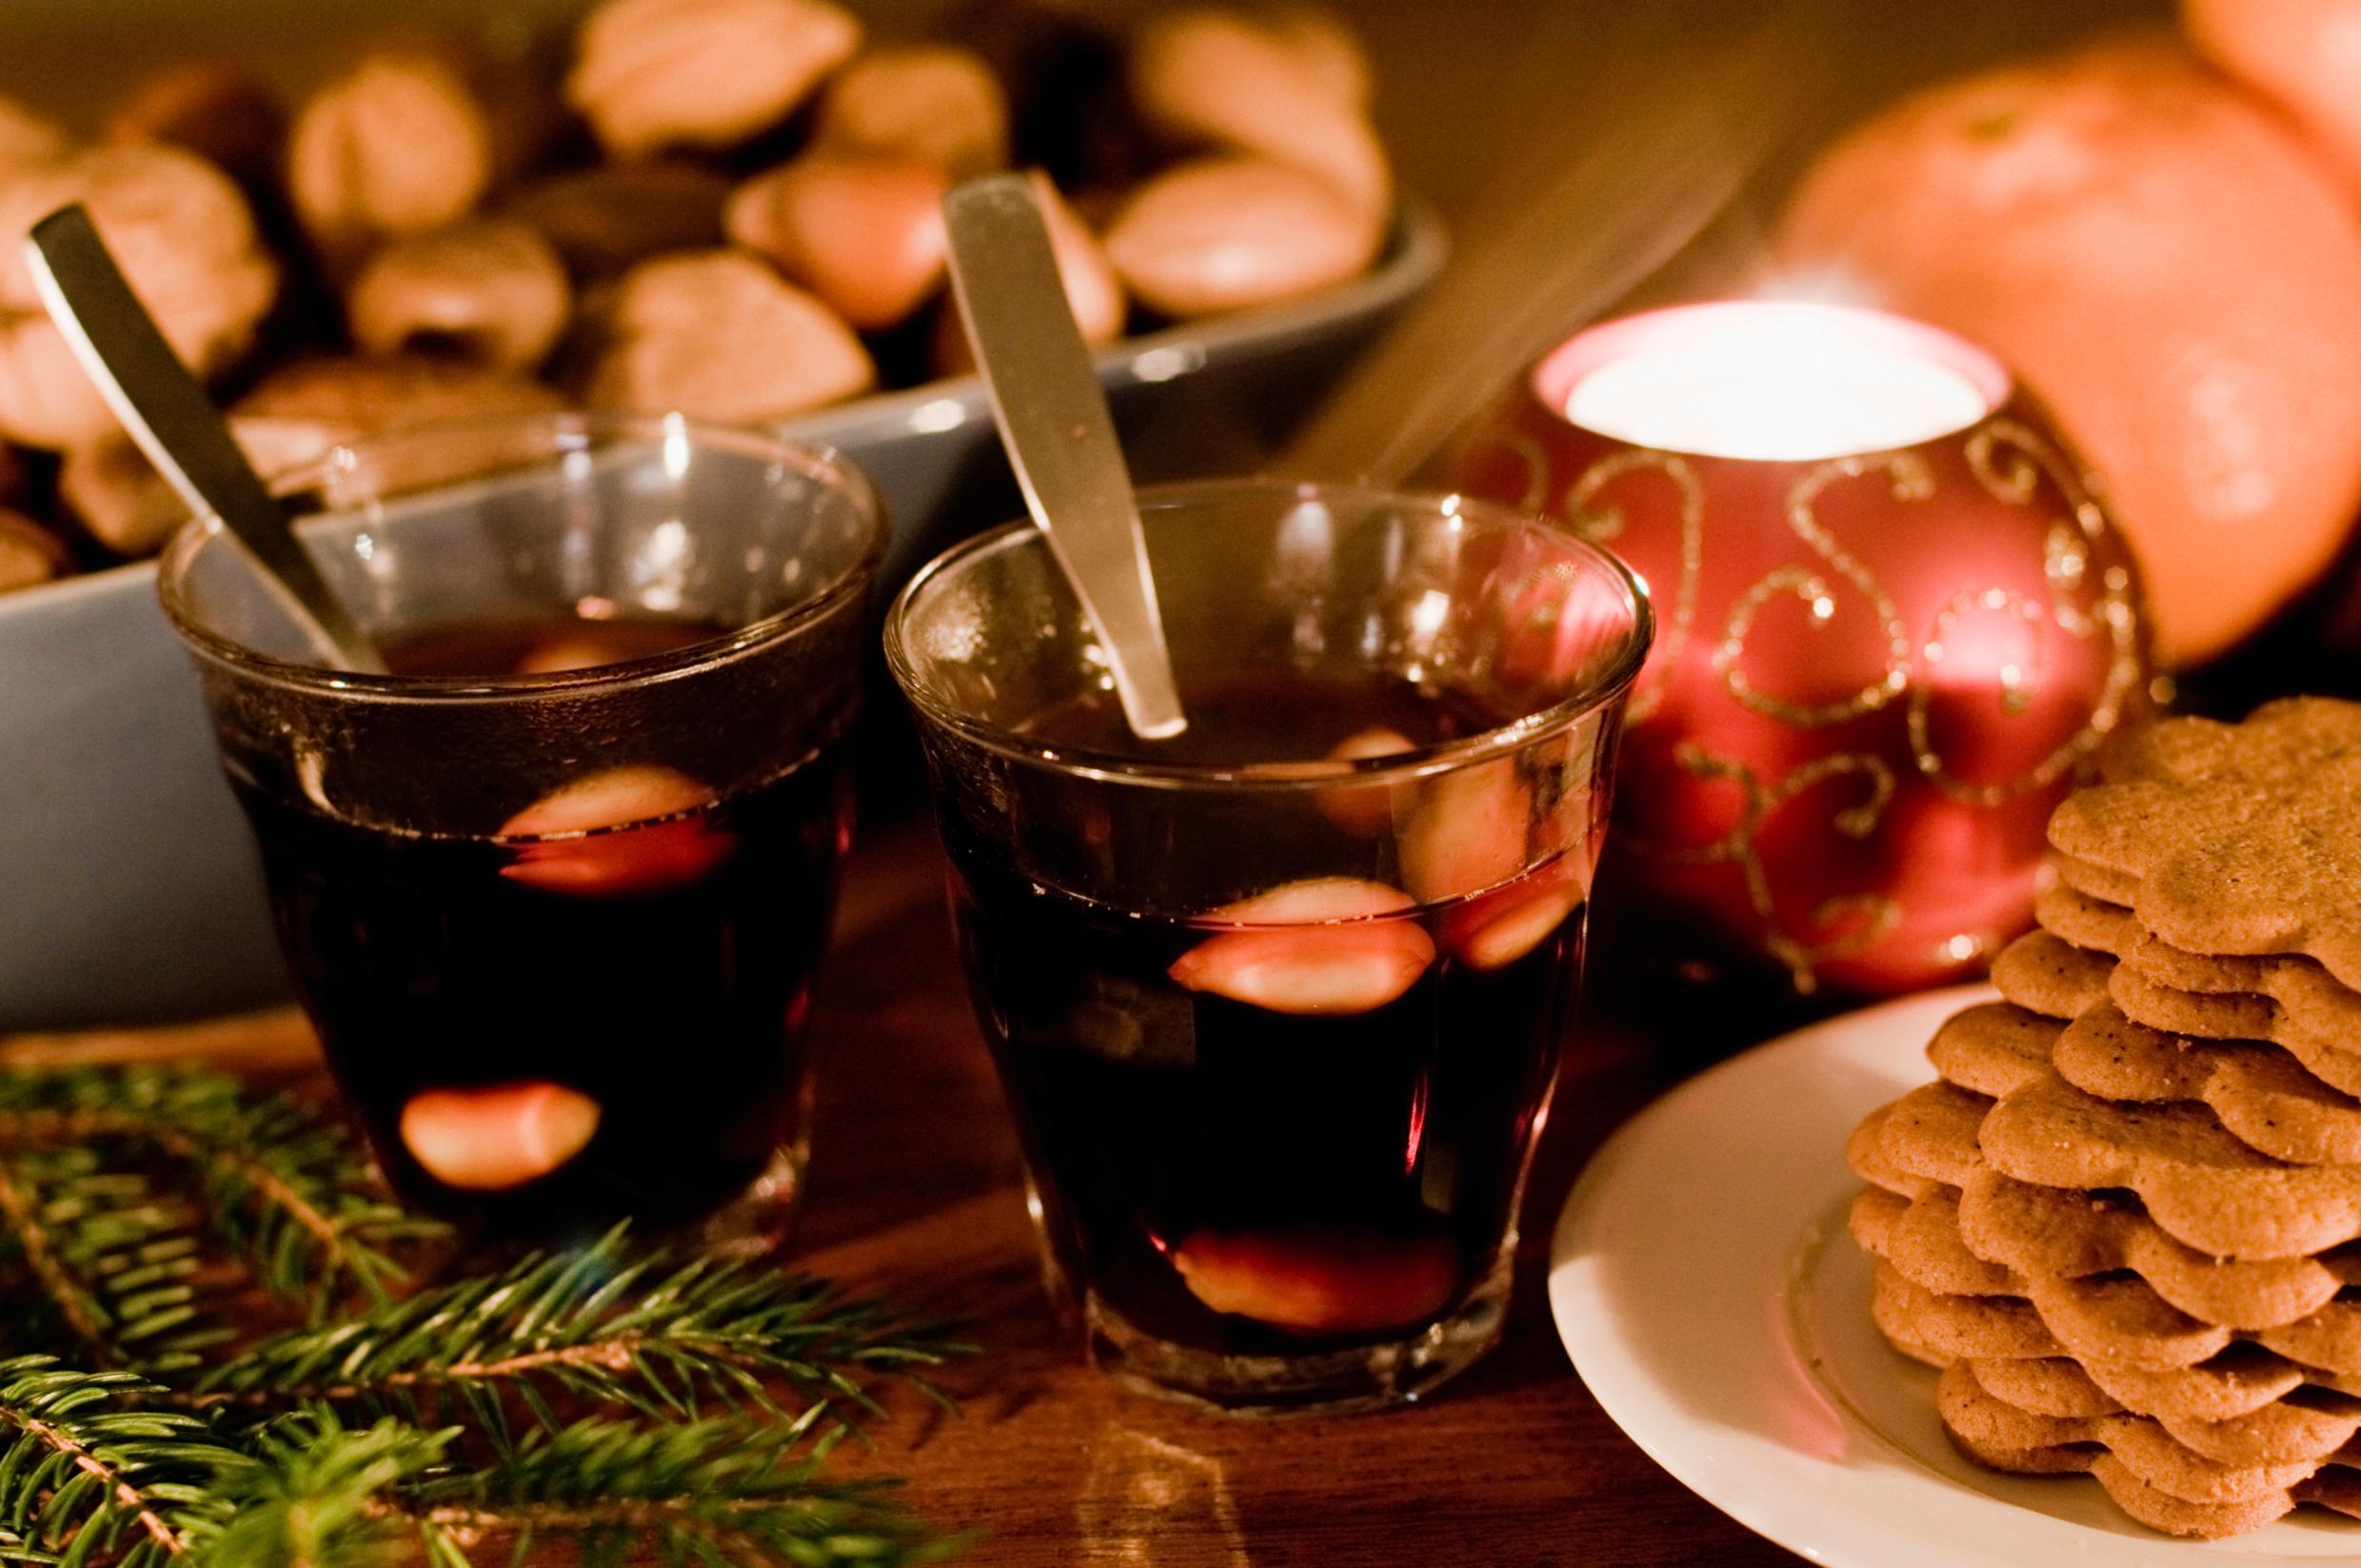 A table laid with two glasses of glögg and gingerbread biscuits.